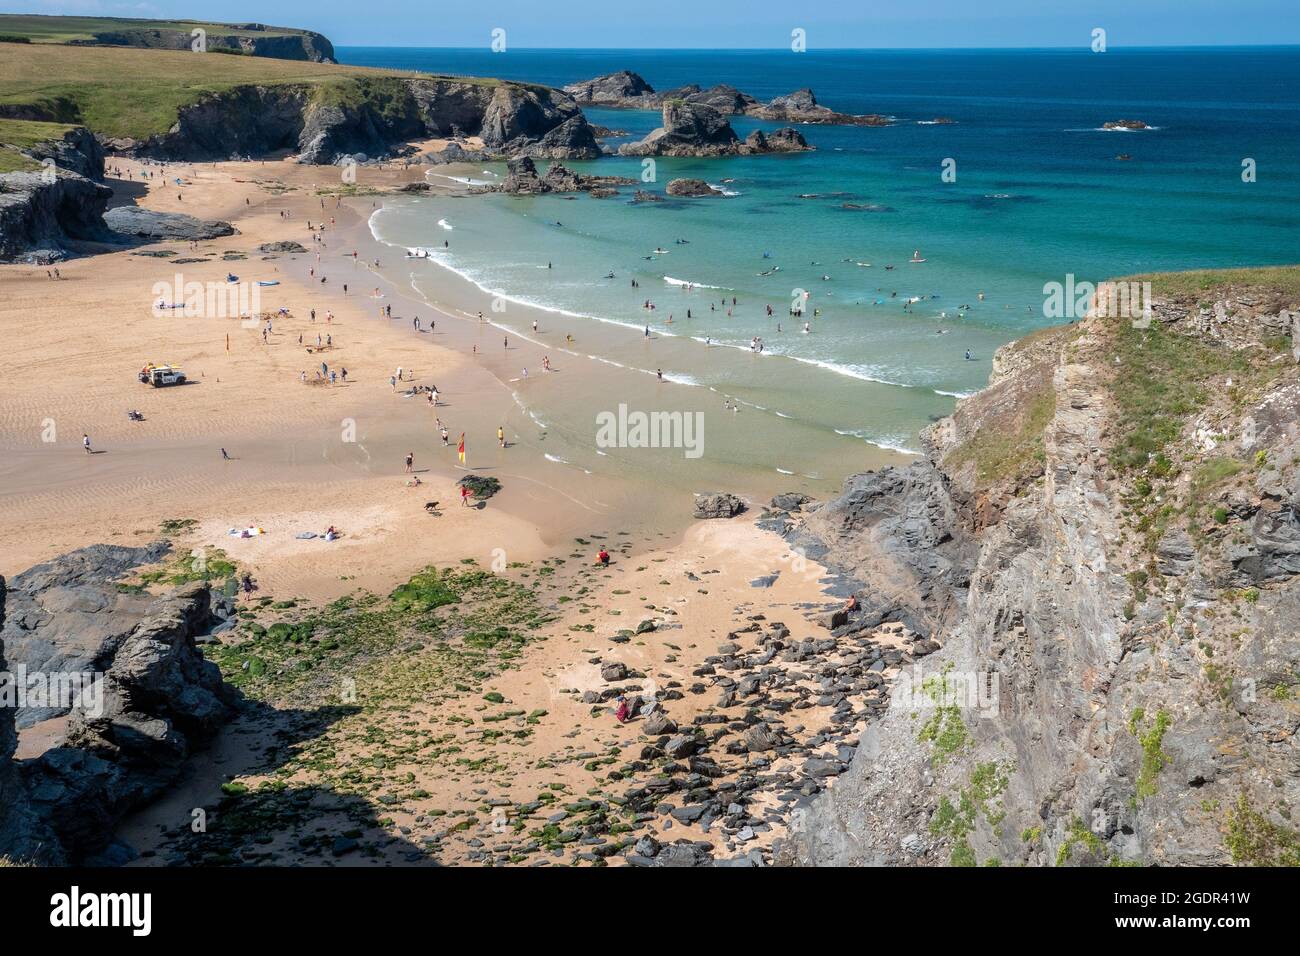 Looking down from the cliffs at the beach at Cornwall's Porthcothan bay on beautiful summer's day Stock Photo